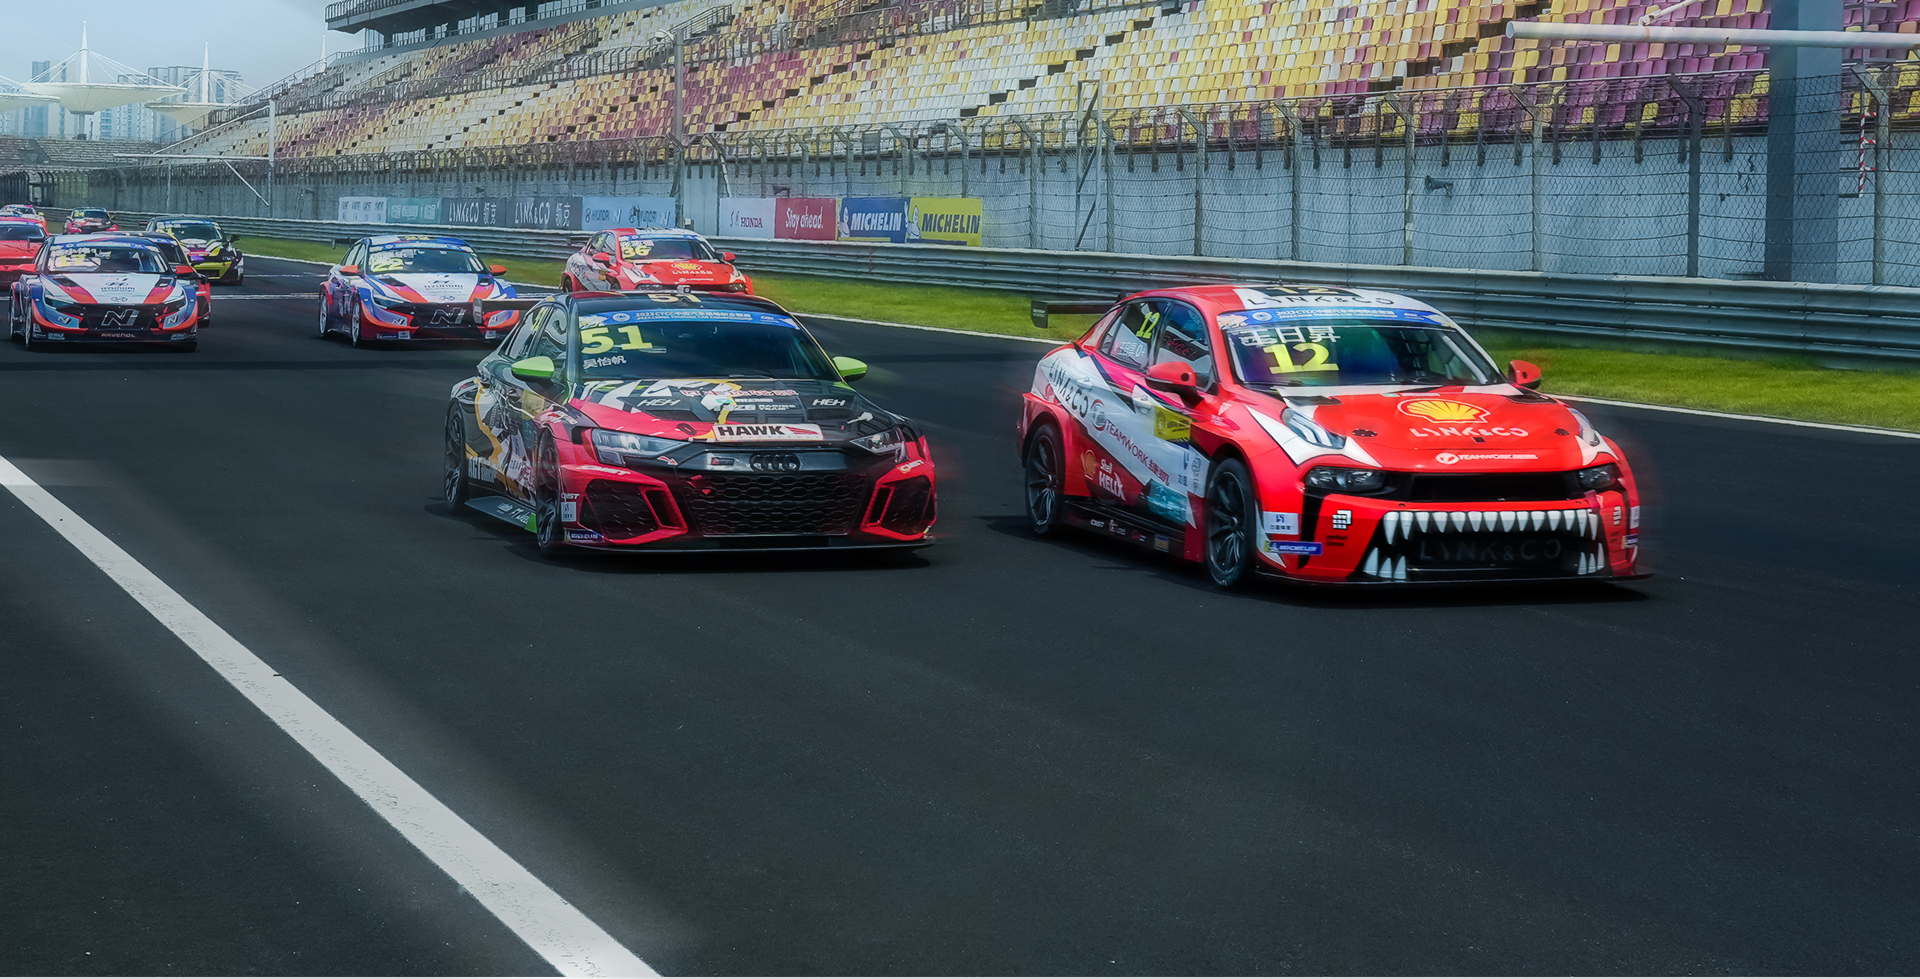 Shell Teamwork Lynk & Co Racing score key points in challenging weekend at Zhuzhou